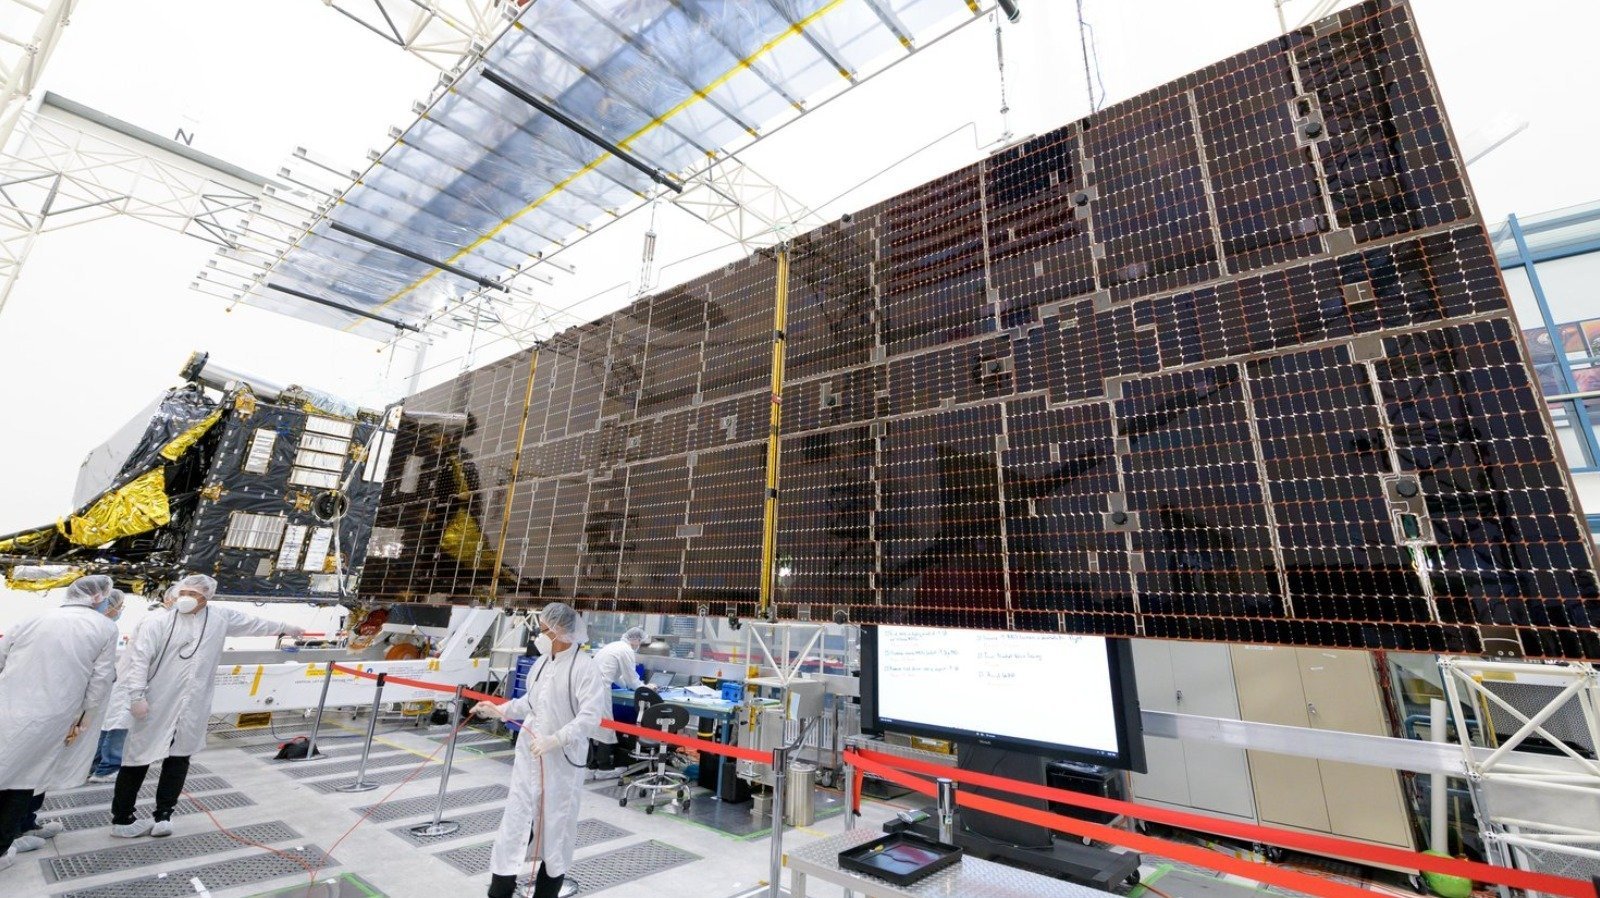 NASA's Psyche Spacecraft Looks Astonishing Assembled For The First Time